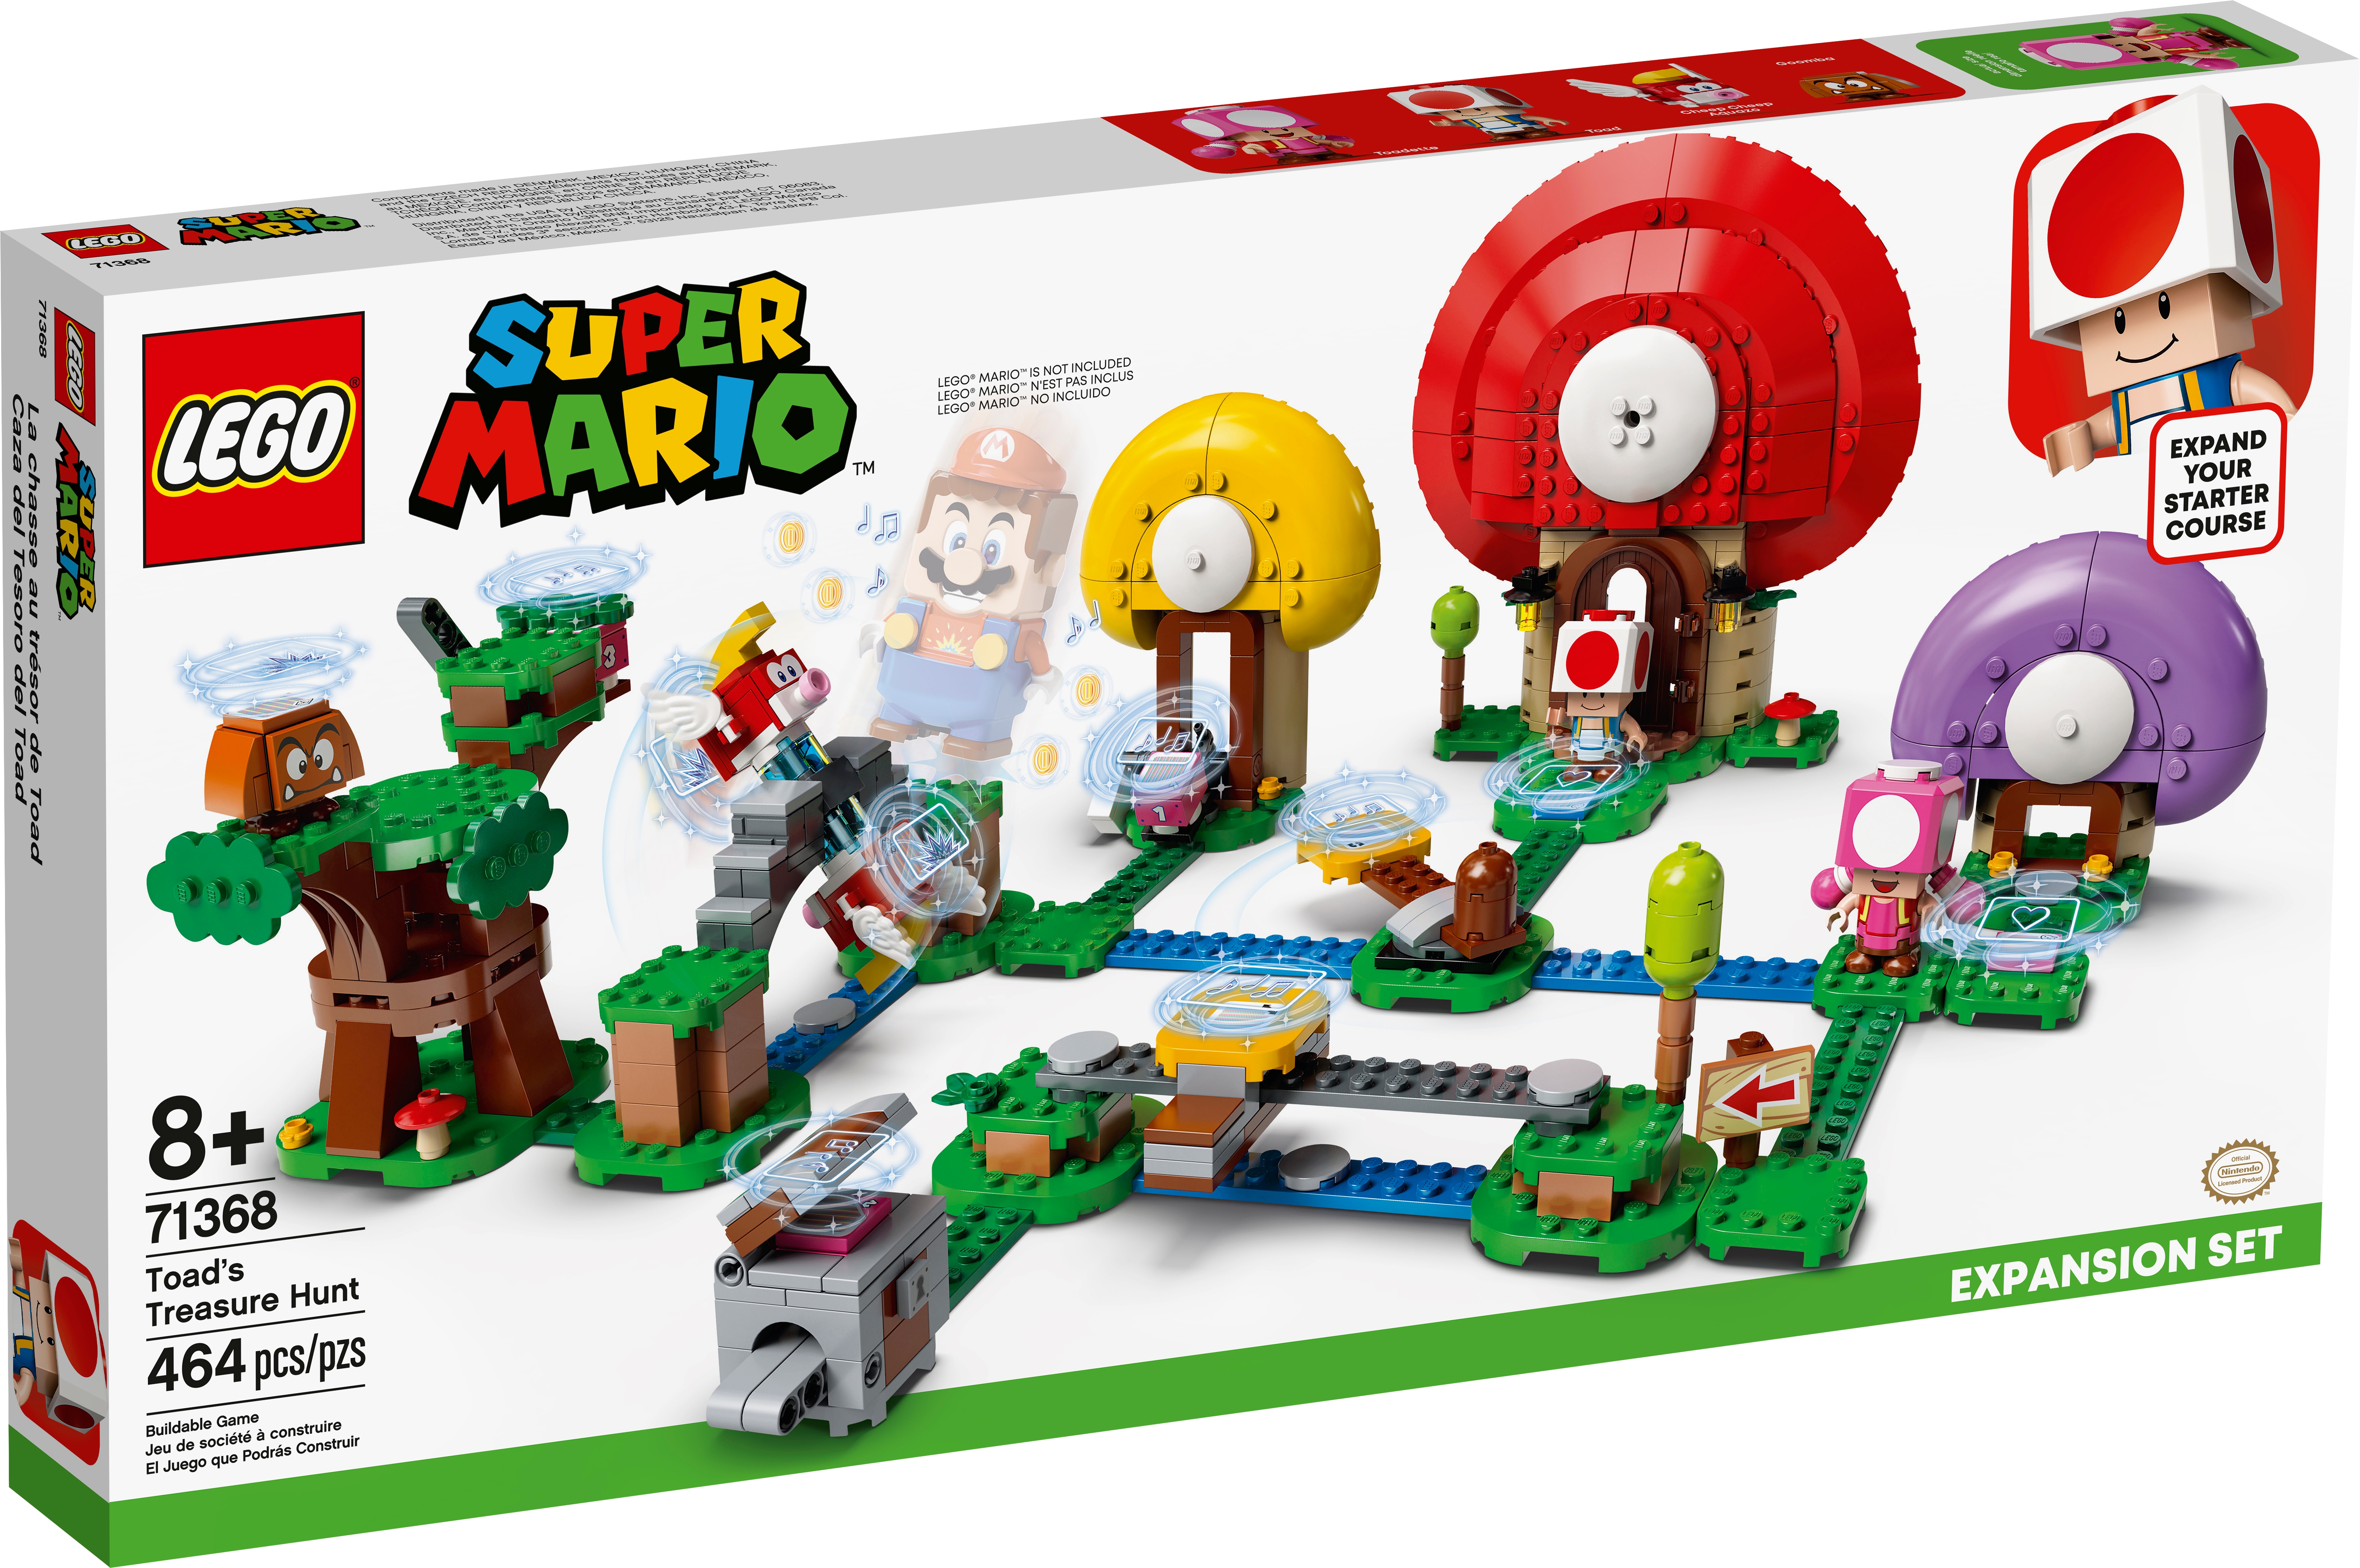 Toad S Treasure Hunt Expansion Set Lego Super Mario Buy Online At The Official Lego Shop Us